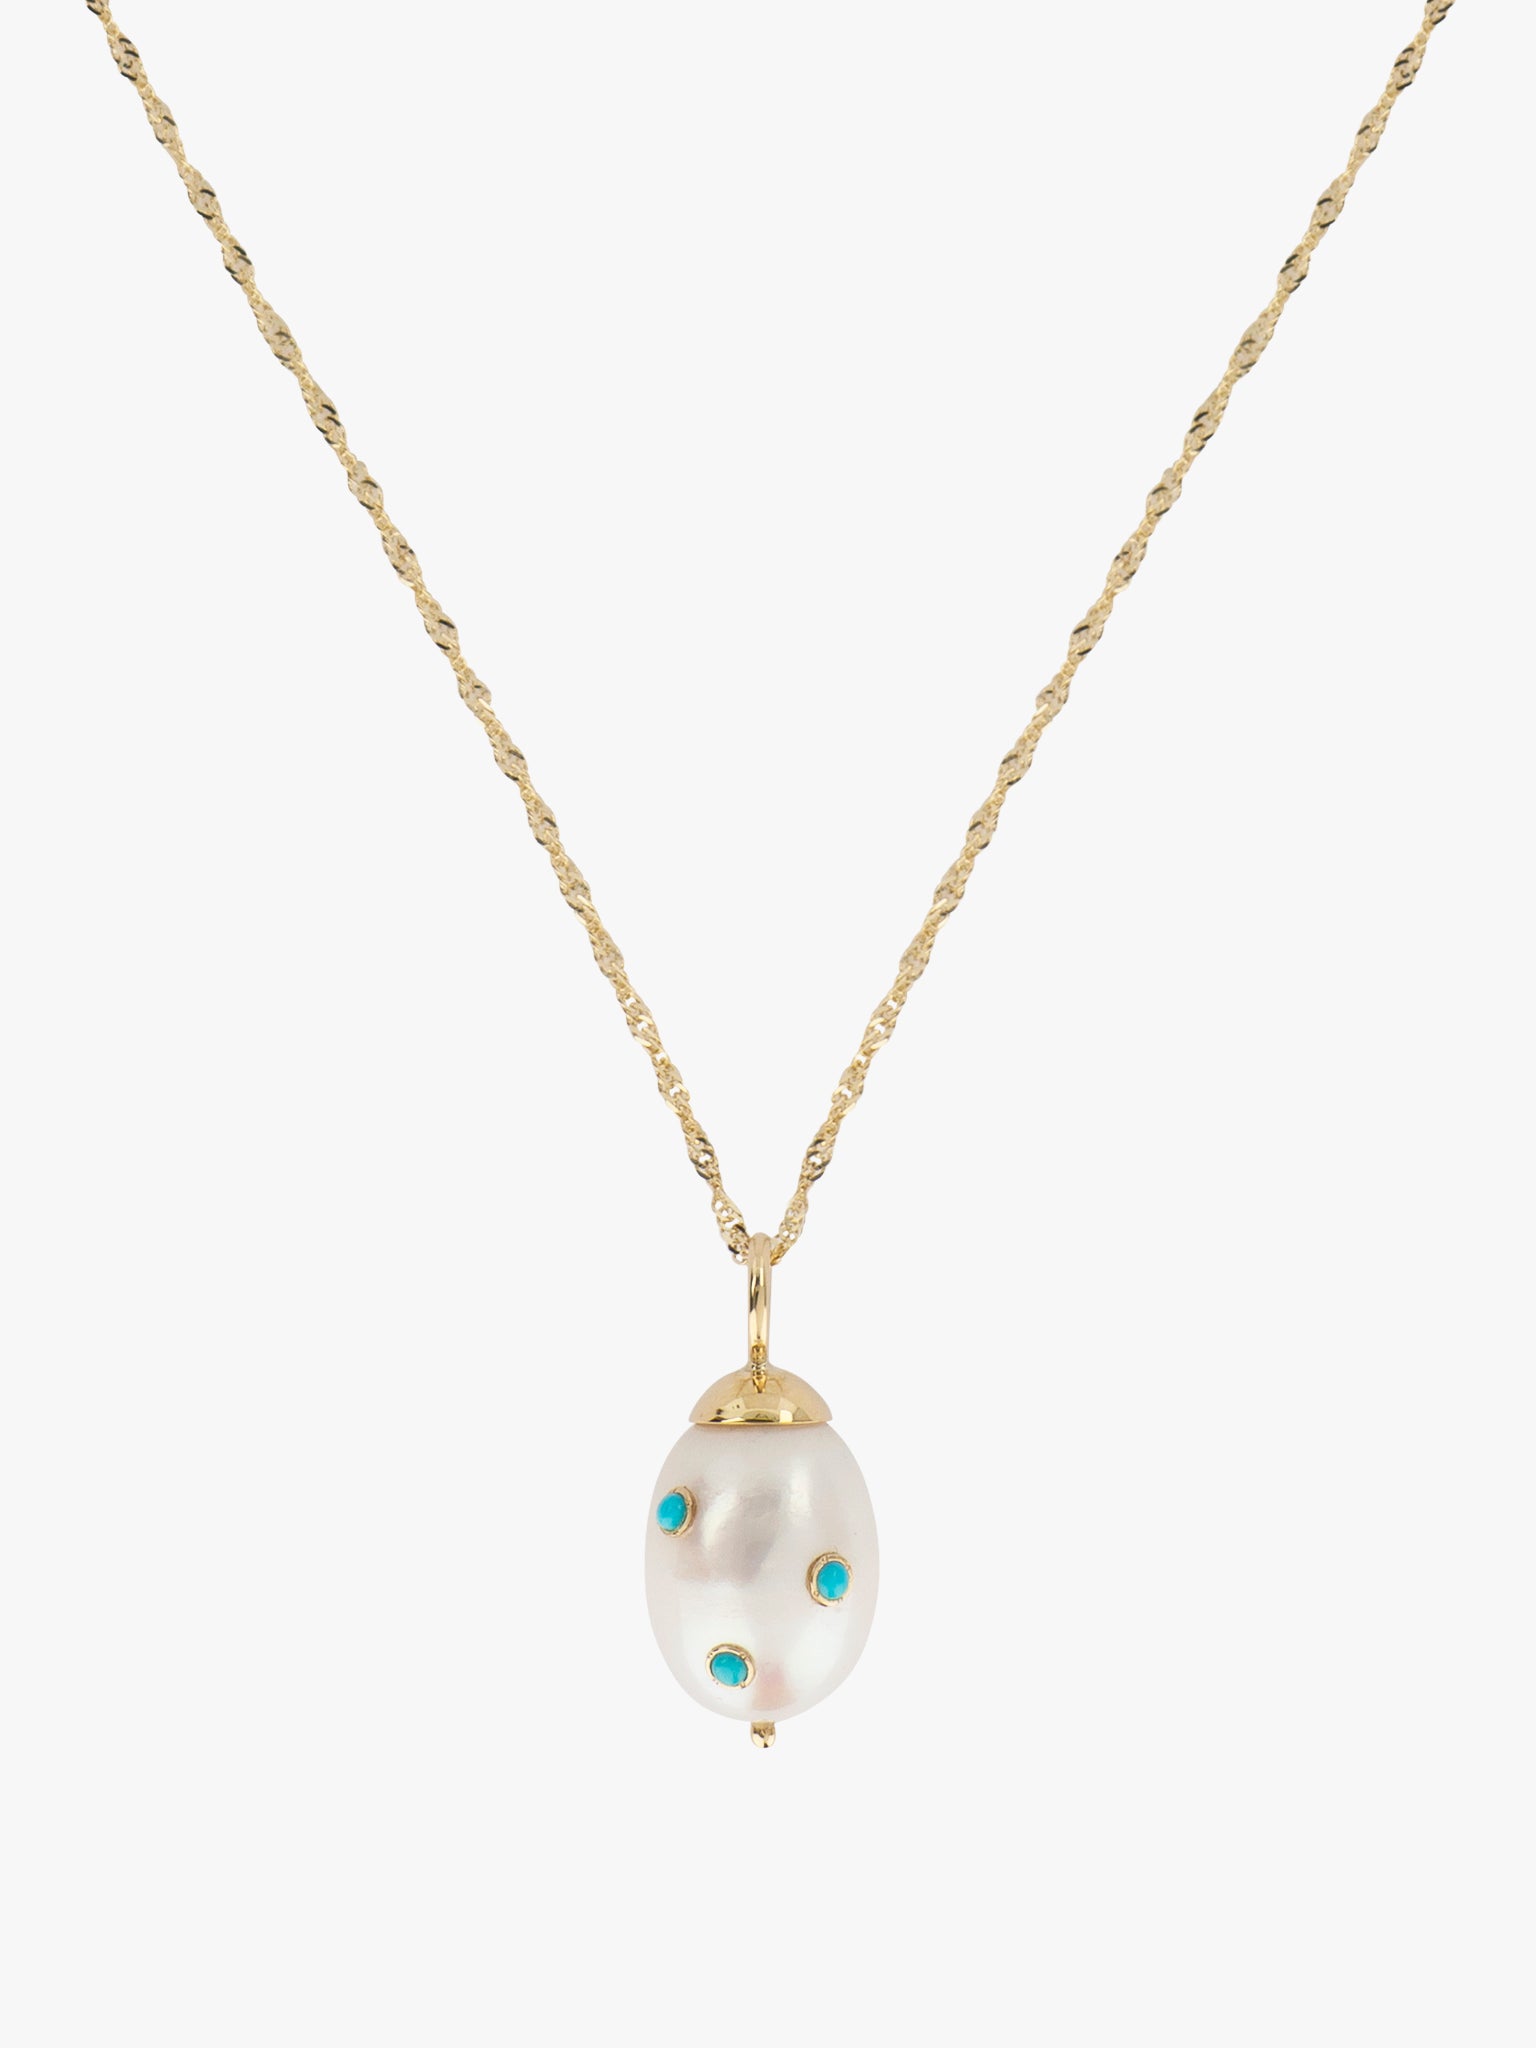 Baroque pearl and turquoise drop necklace